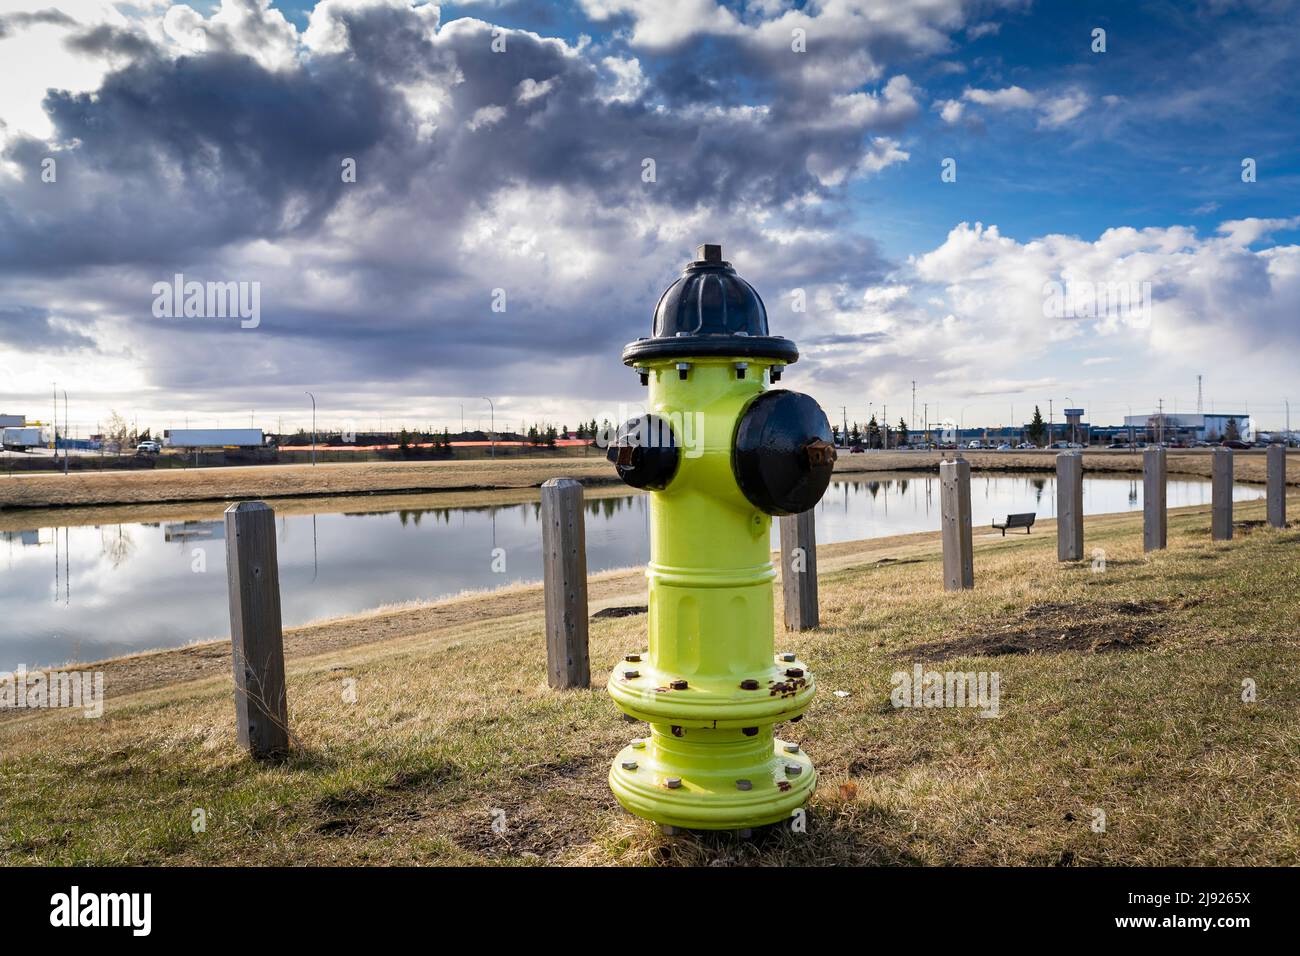 A yellow fire hydrant connected to infrastructure standing next to a storm retention pond in an industrial park in Airdrie Alberta Canada under a dram Stock Photo